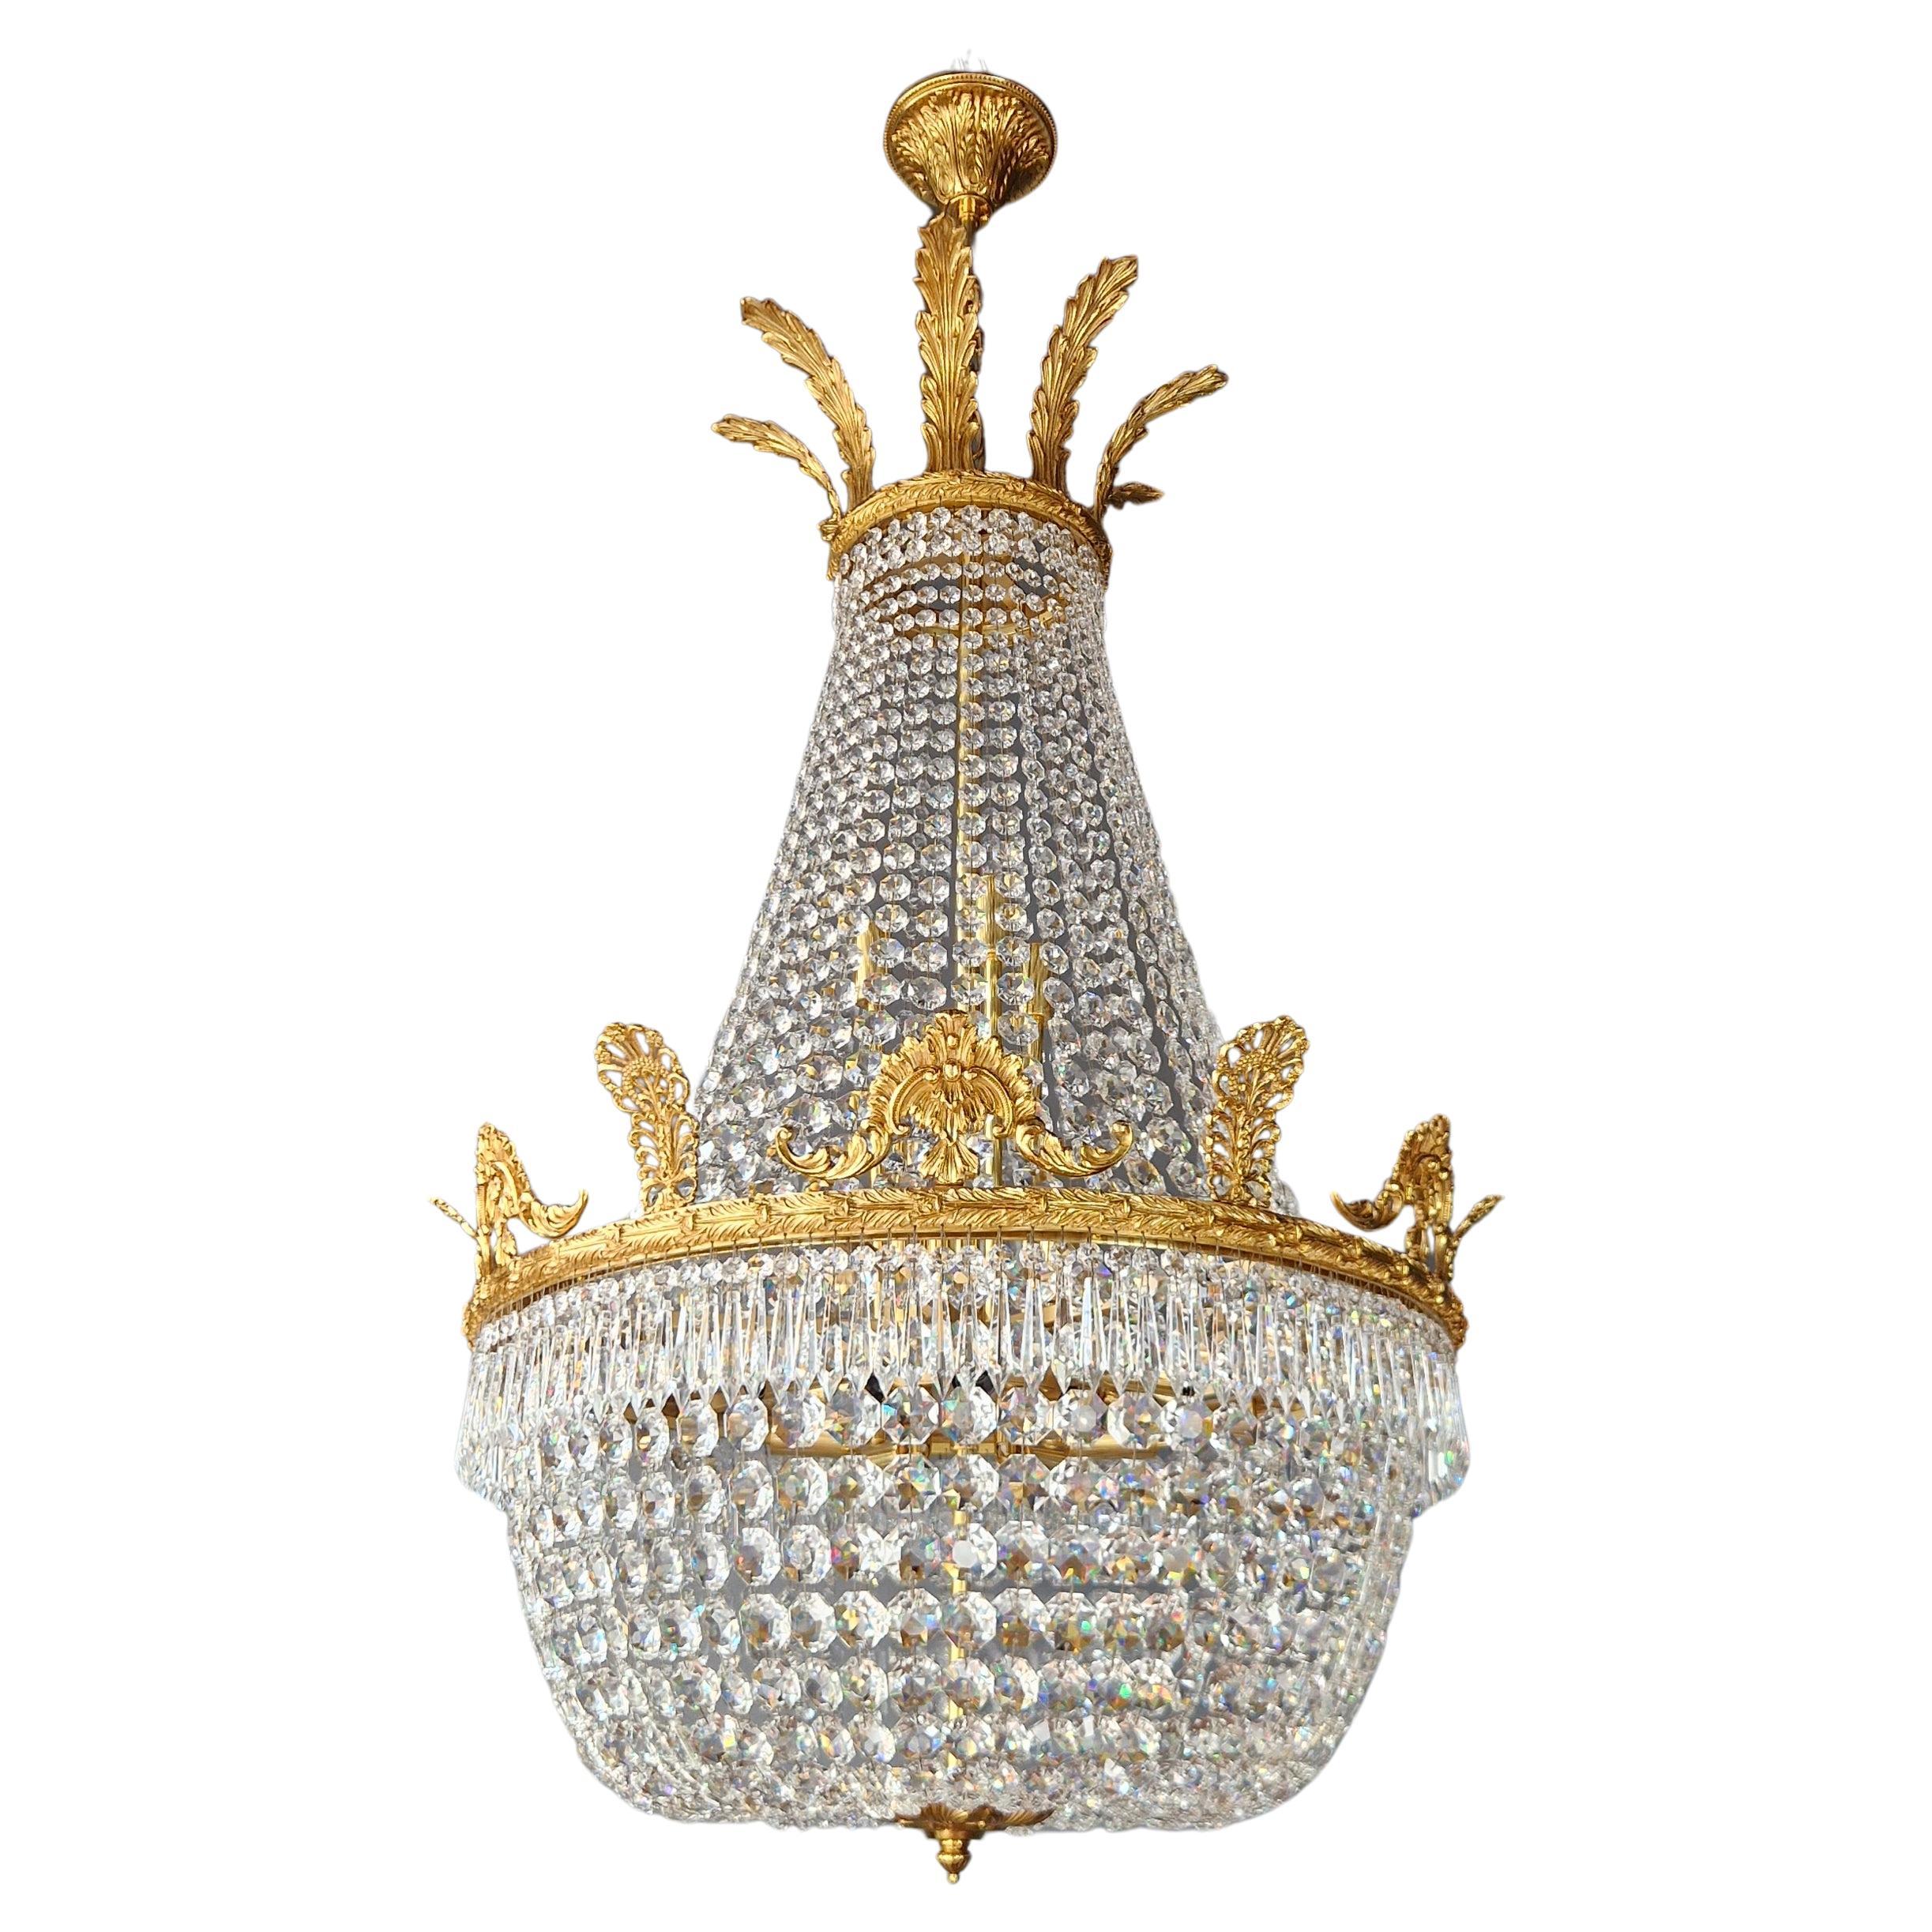 Brass Basket Empire Sac a Pearl Chandelier Crystal Lustre Lamp Antique Gold For Sale